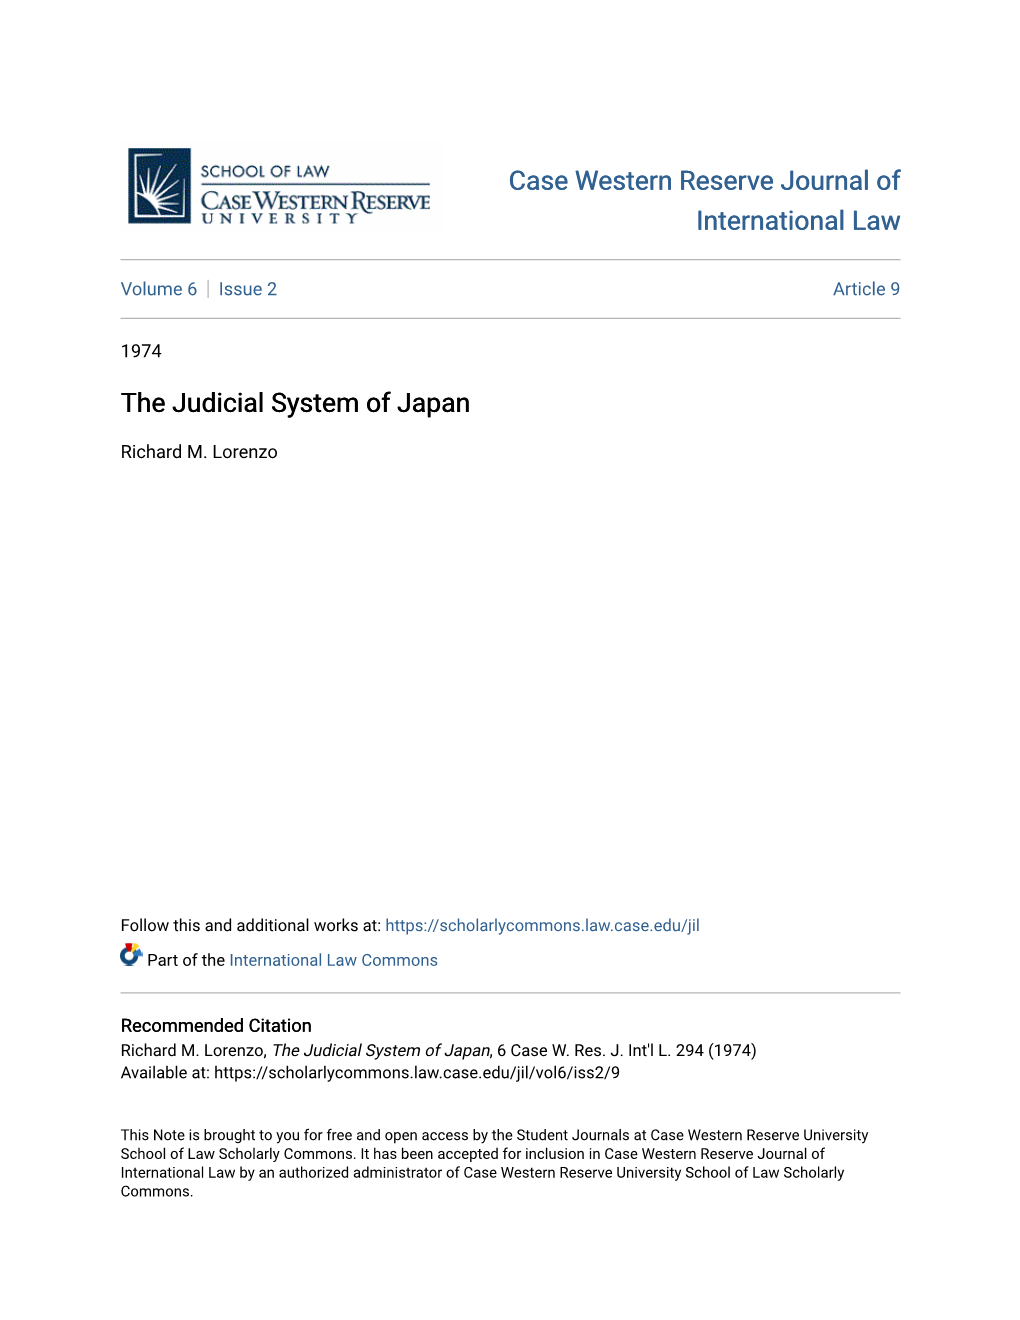 The Judicial System of Japan